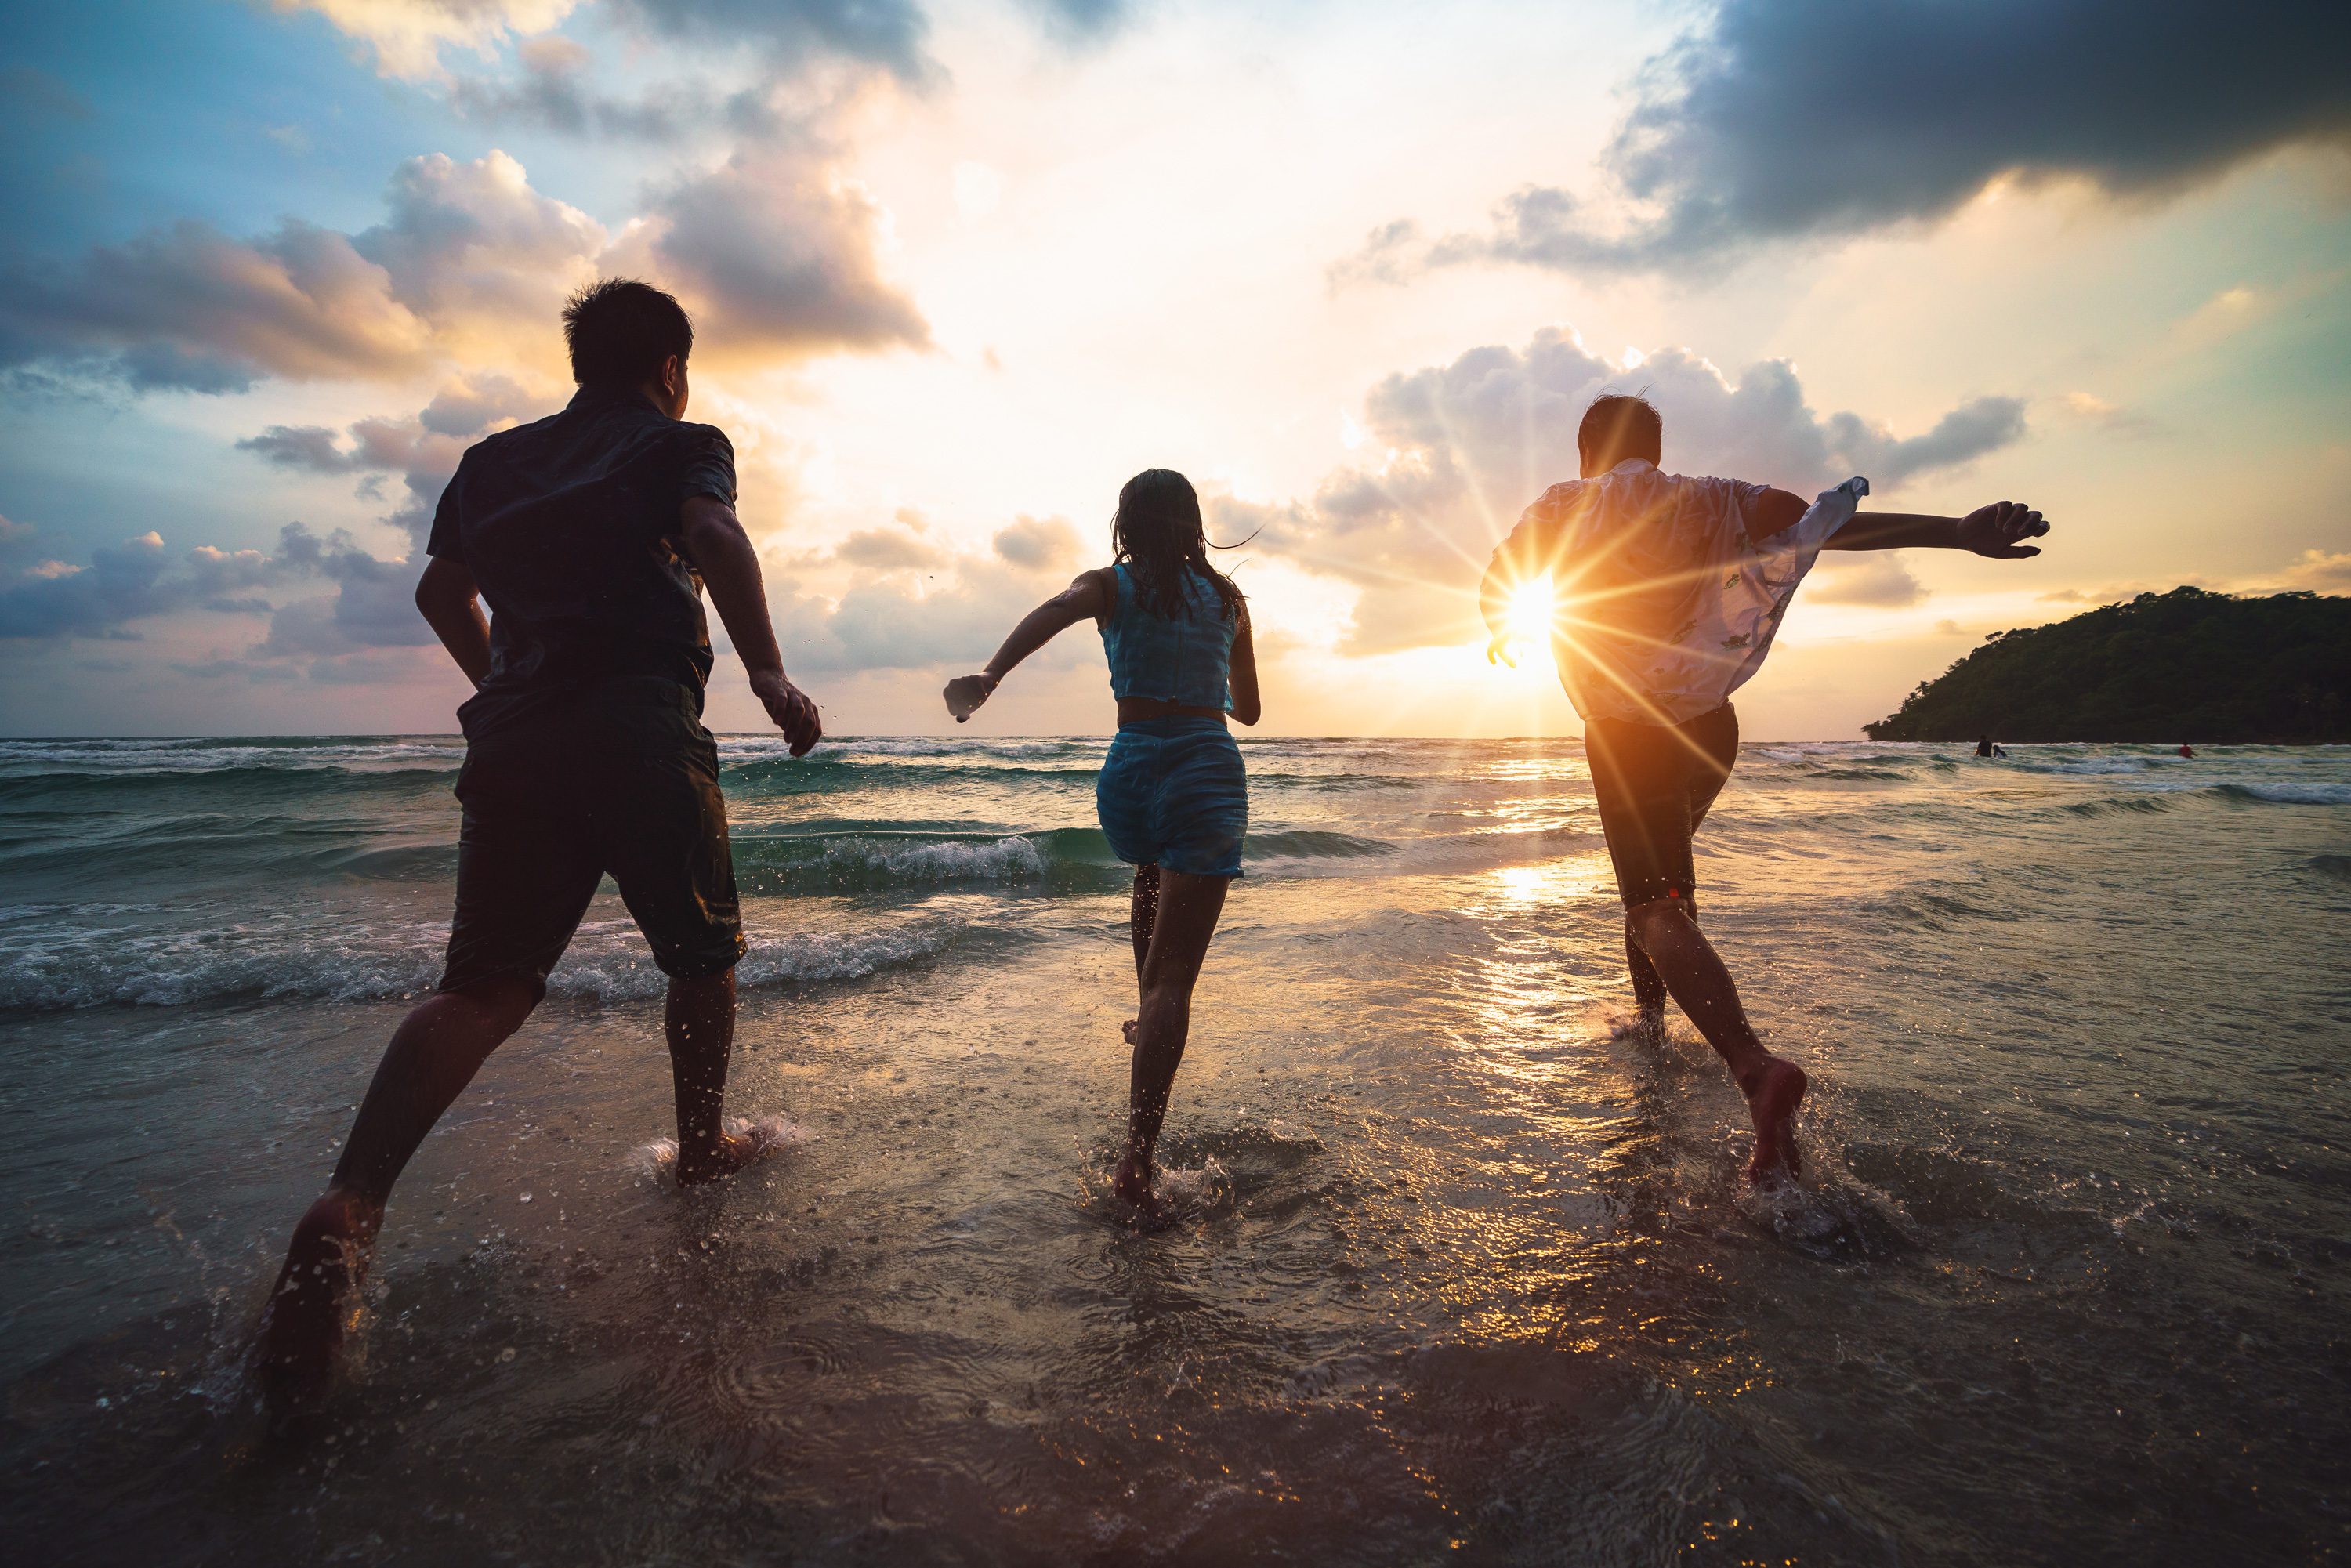 Three people running on a beach at sunset illustrate the idea of happiness.